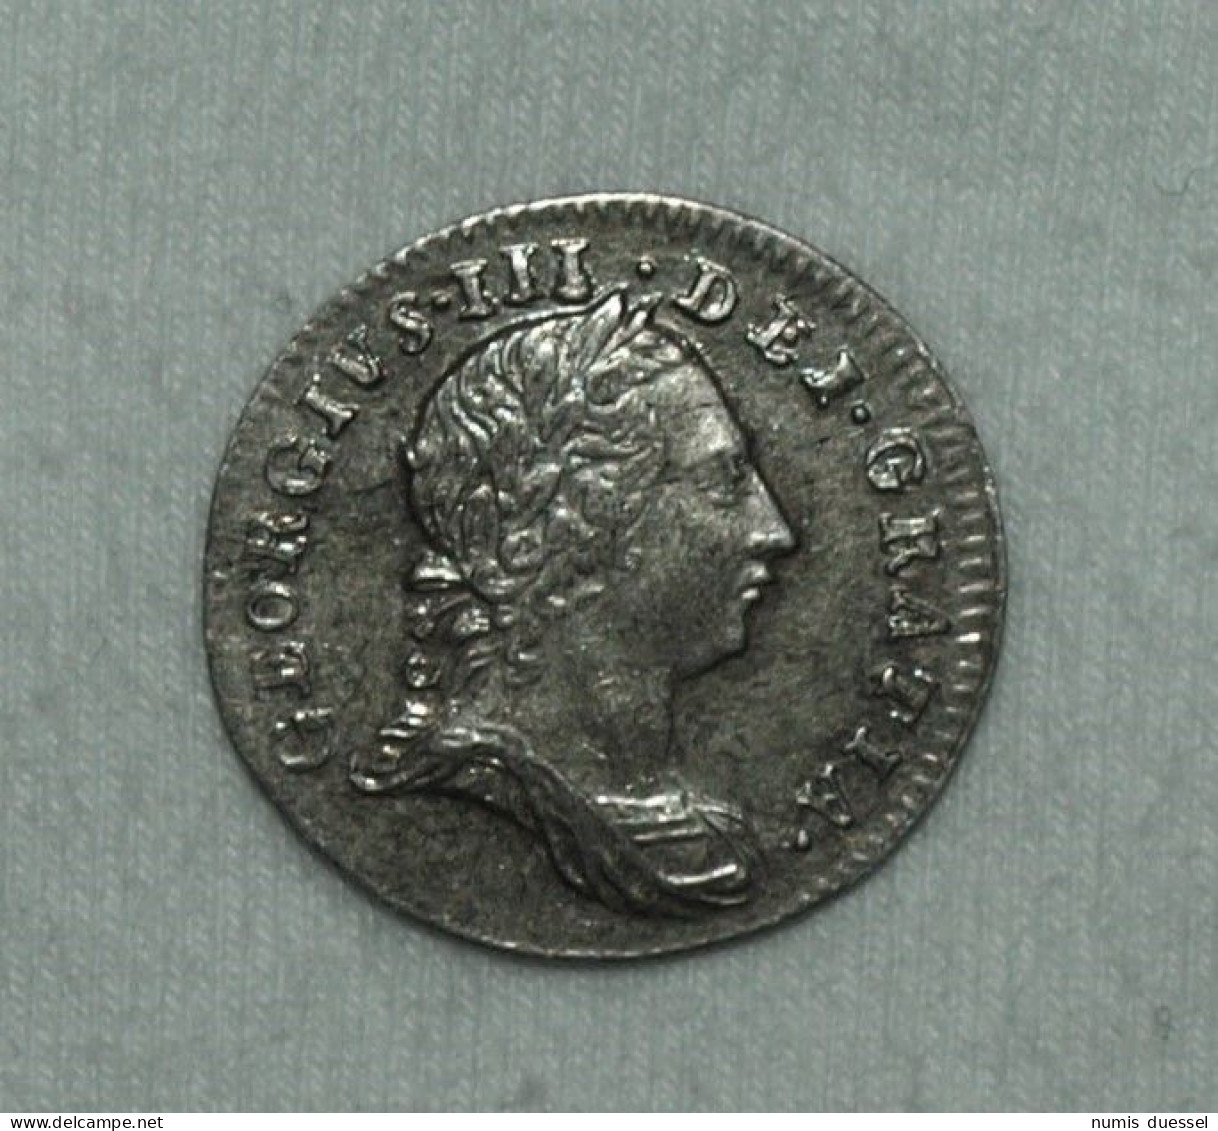 Silber/Silver Prooflike Maundy Großbritannien/Great Britain George III, 1762, 3 Pence VZ+/XF+ - Maundy Sets & Commemorative